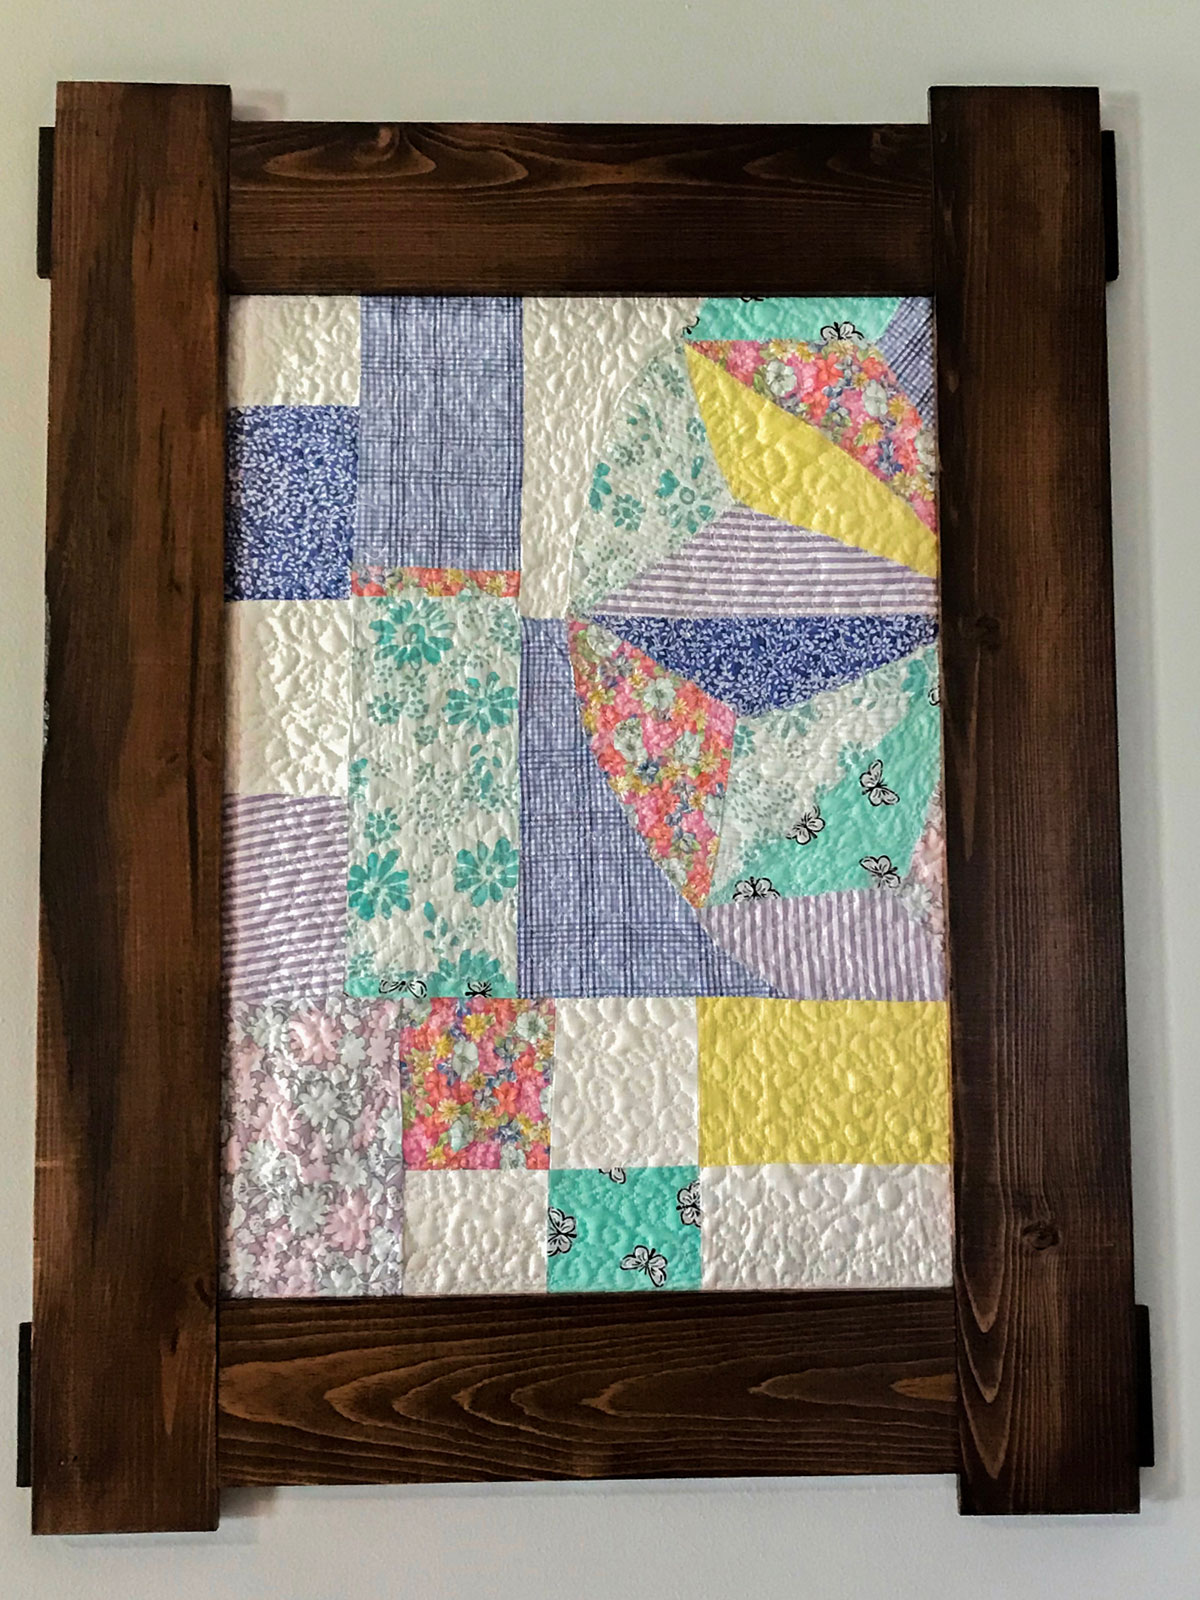 Vintage Quilt Piece 9 1/2“ X 9 1/2” Butterfly Quilt DIY Project Rustic Primitive Cottagecore American Farmhouse Spring Summer Projects